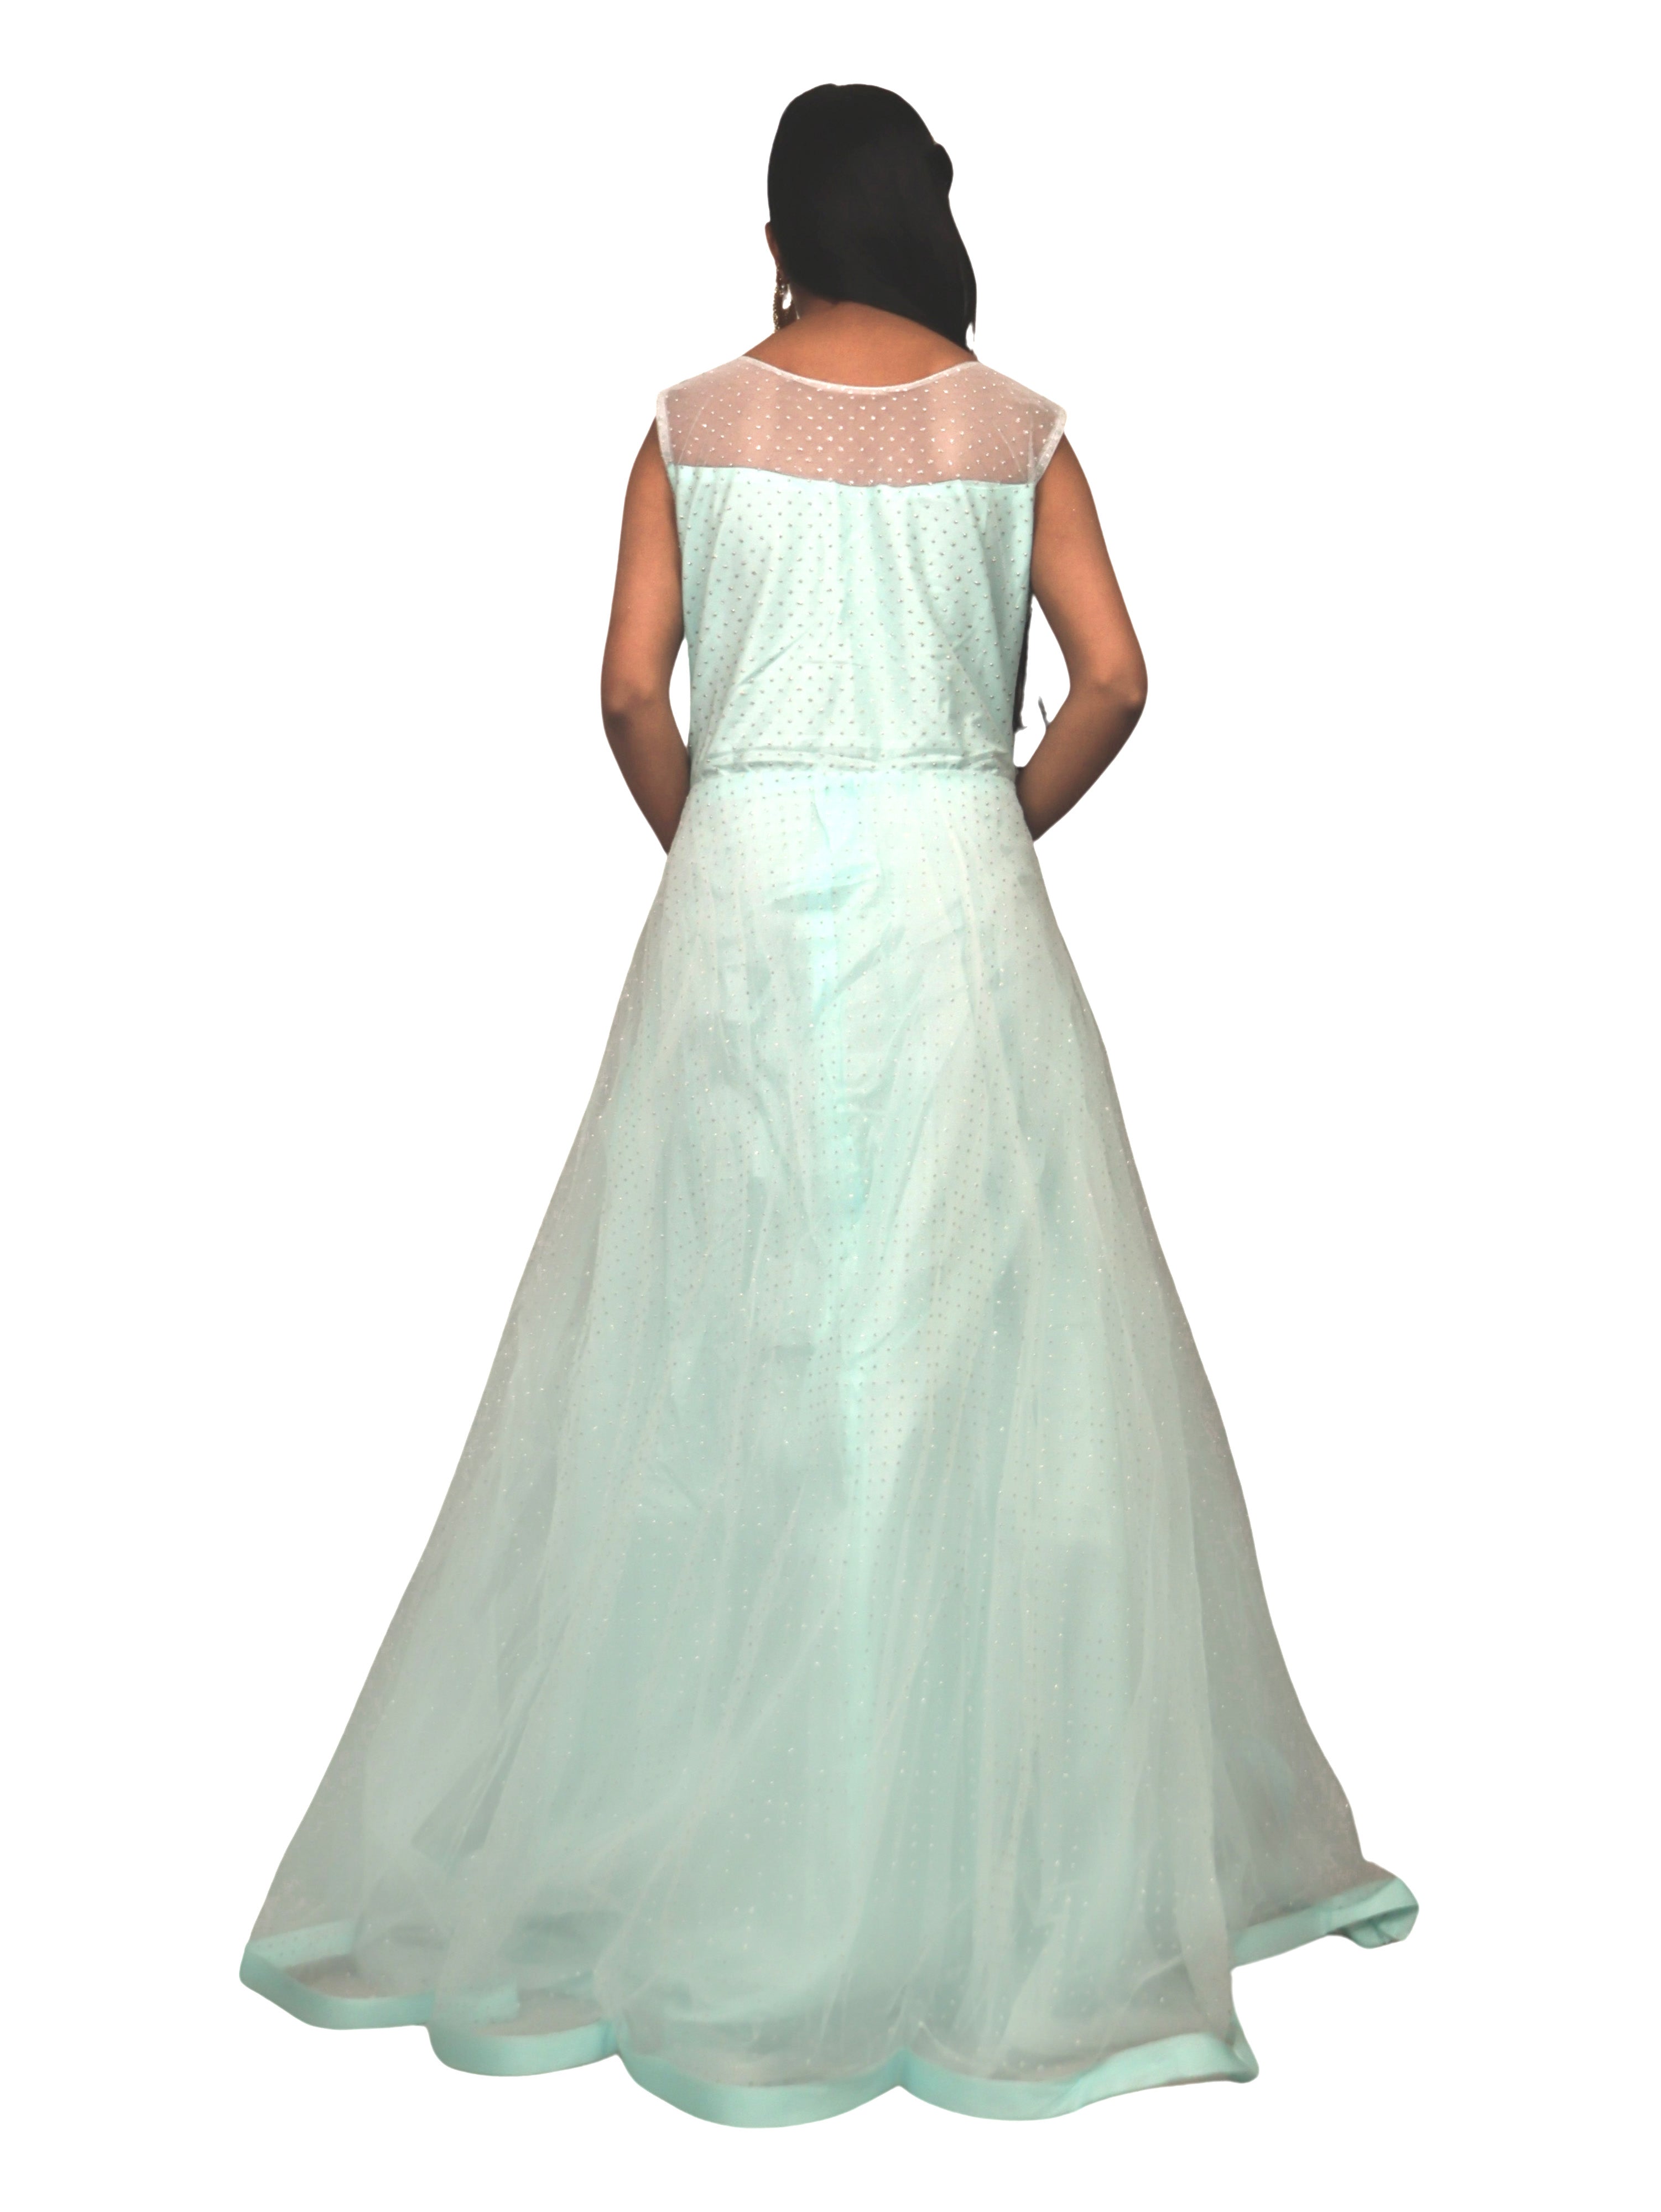 Gown with Embroidery &amp; Glitter Work by Shreekama Sky Blue Designer Gowns for Party Festival Wedding Occasion in Noida